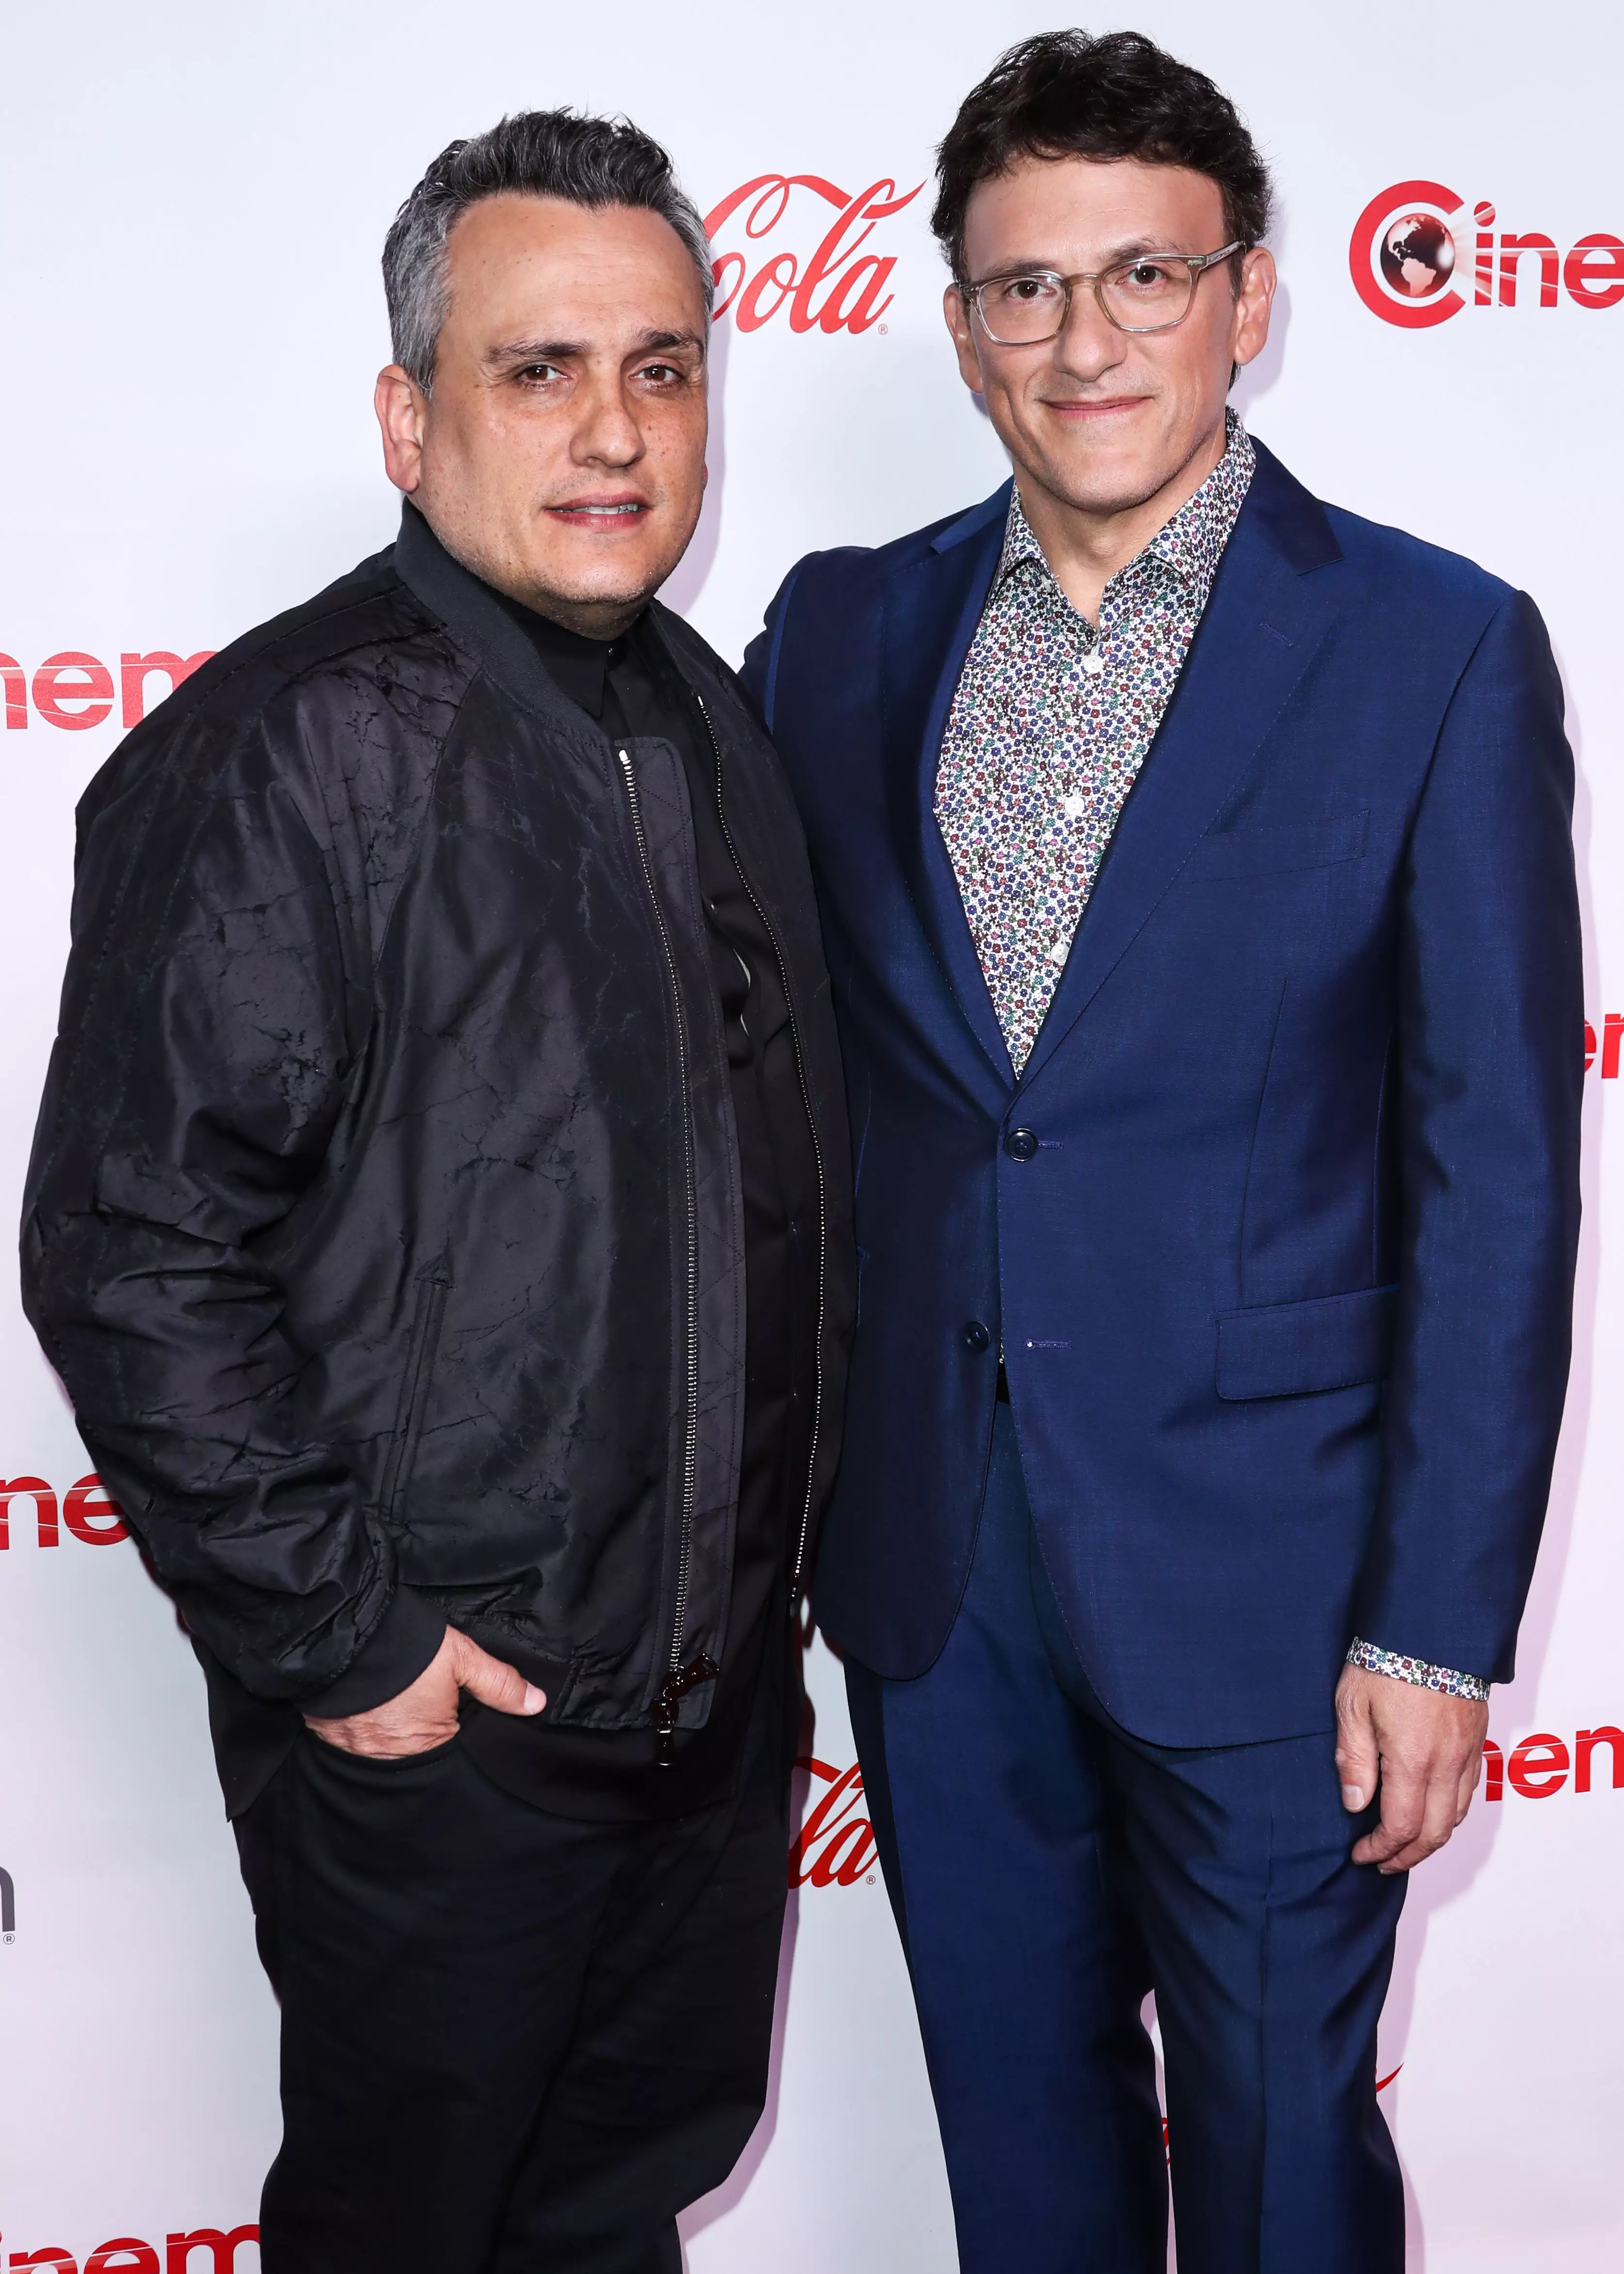 The Russo brothers' new movie is set to be Netflix's most expensive yet.